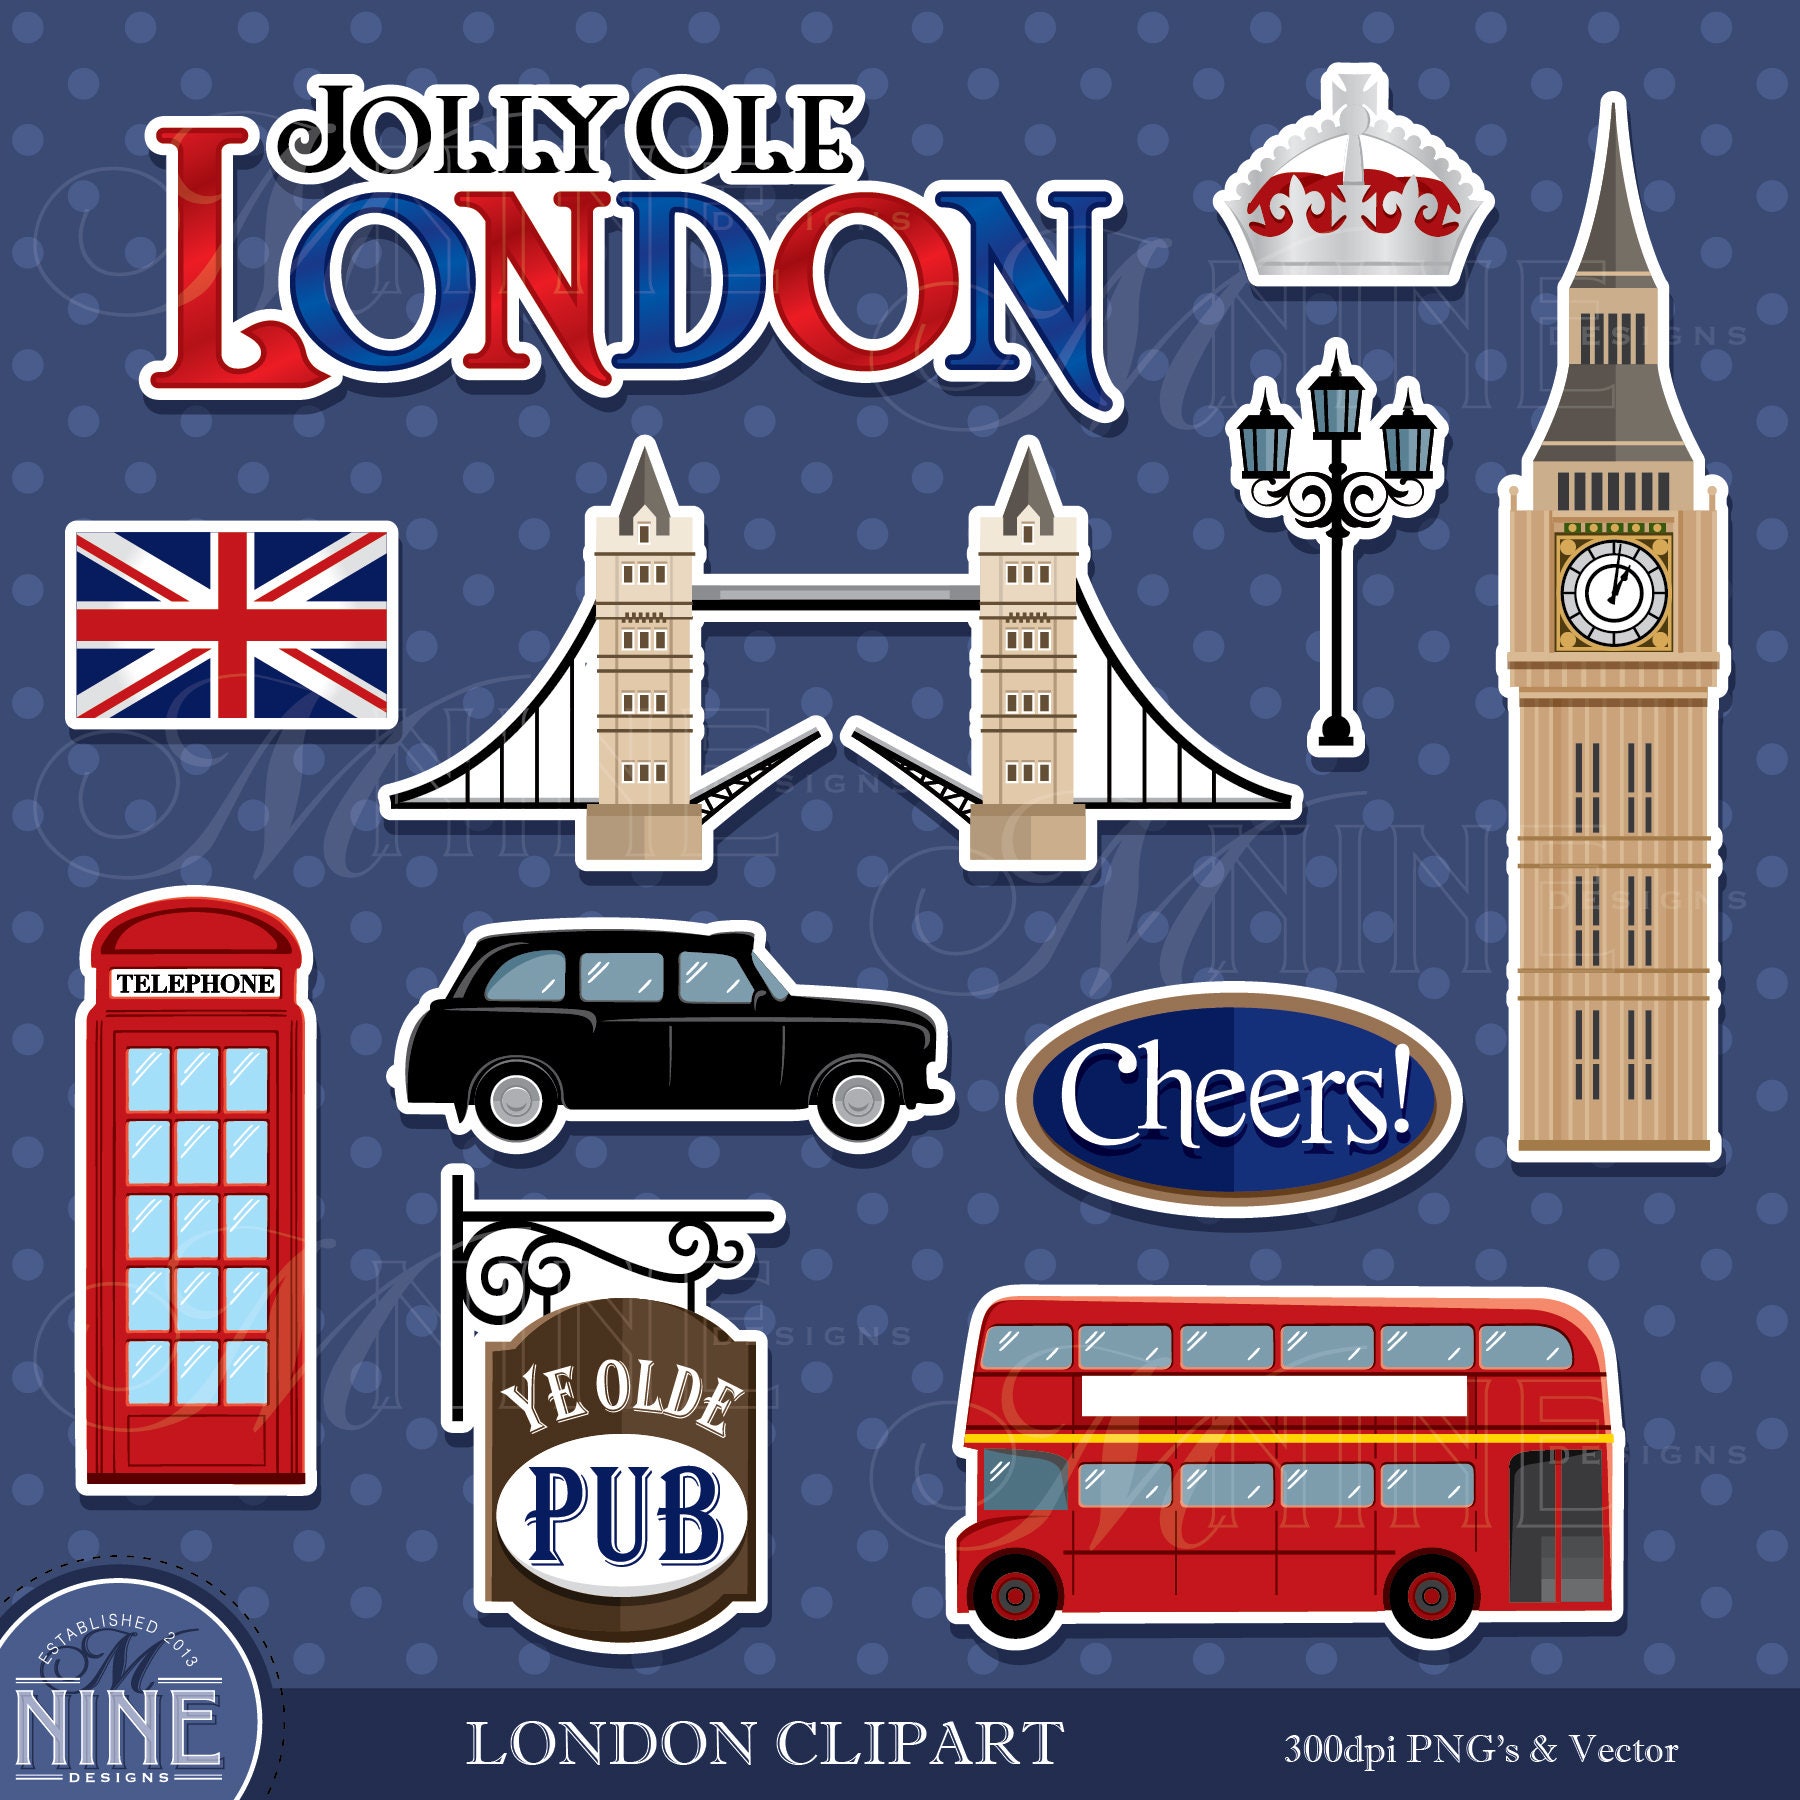 London Clipart British London Clipart British Clipart Etsy | Images and ...